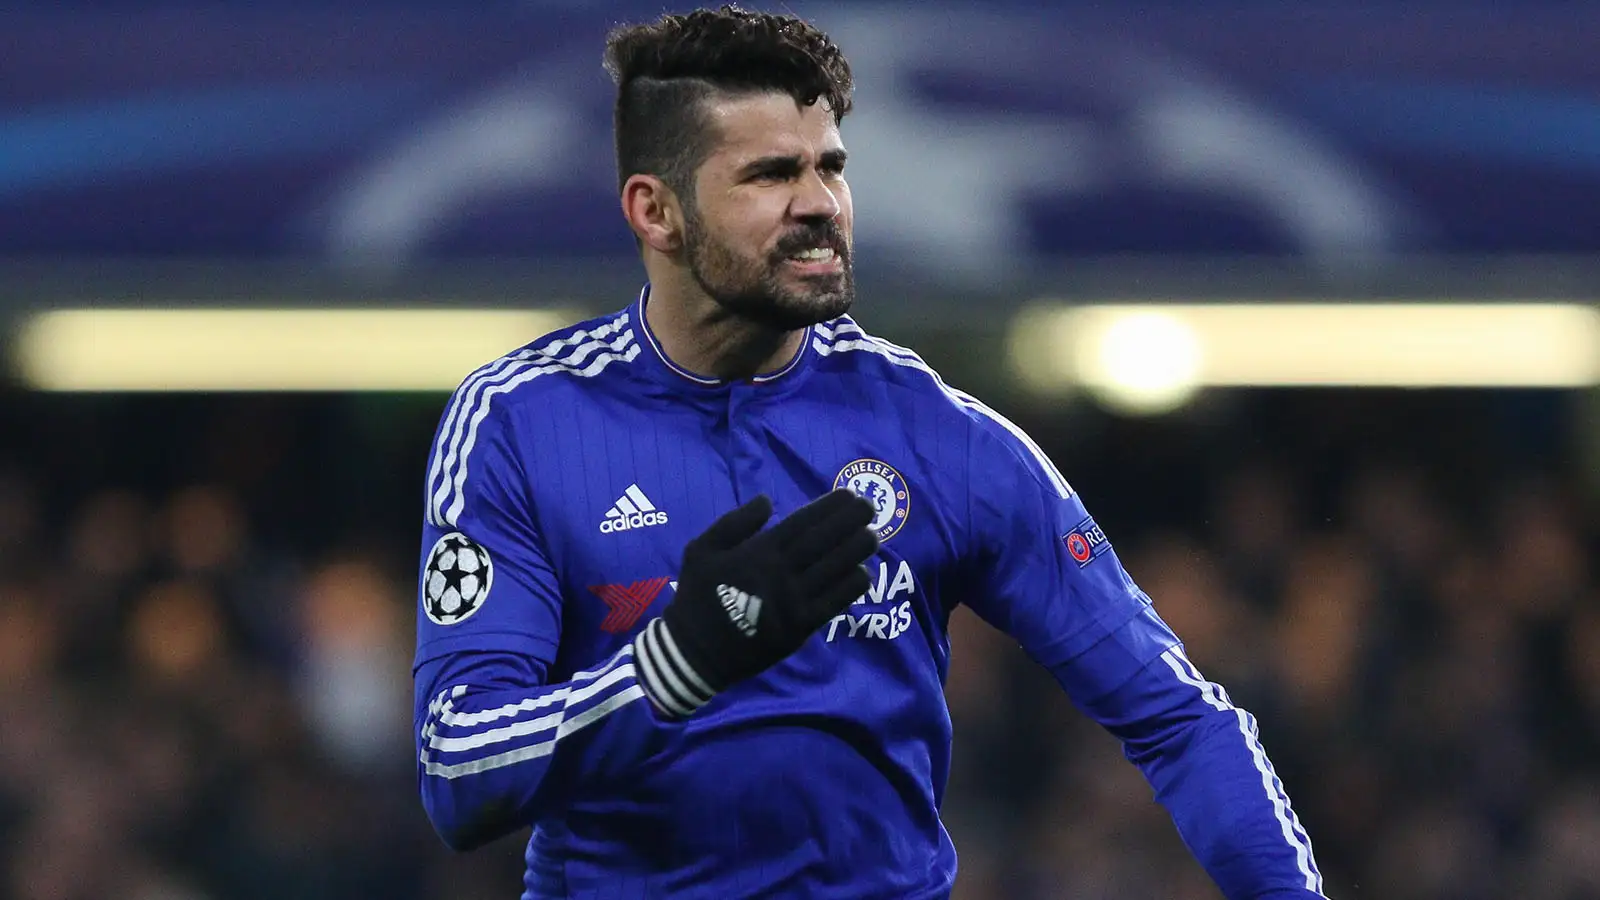 Watch: Diego Costa is ready to bring chaos back to the Premier League